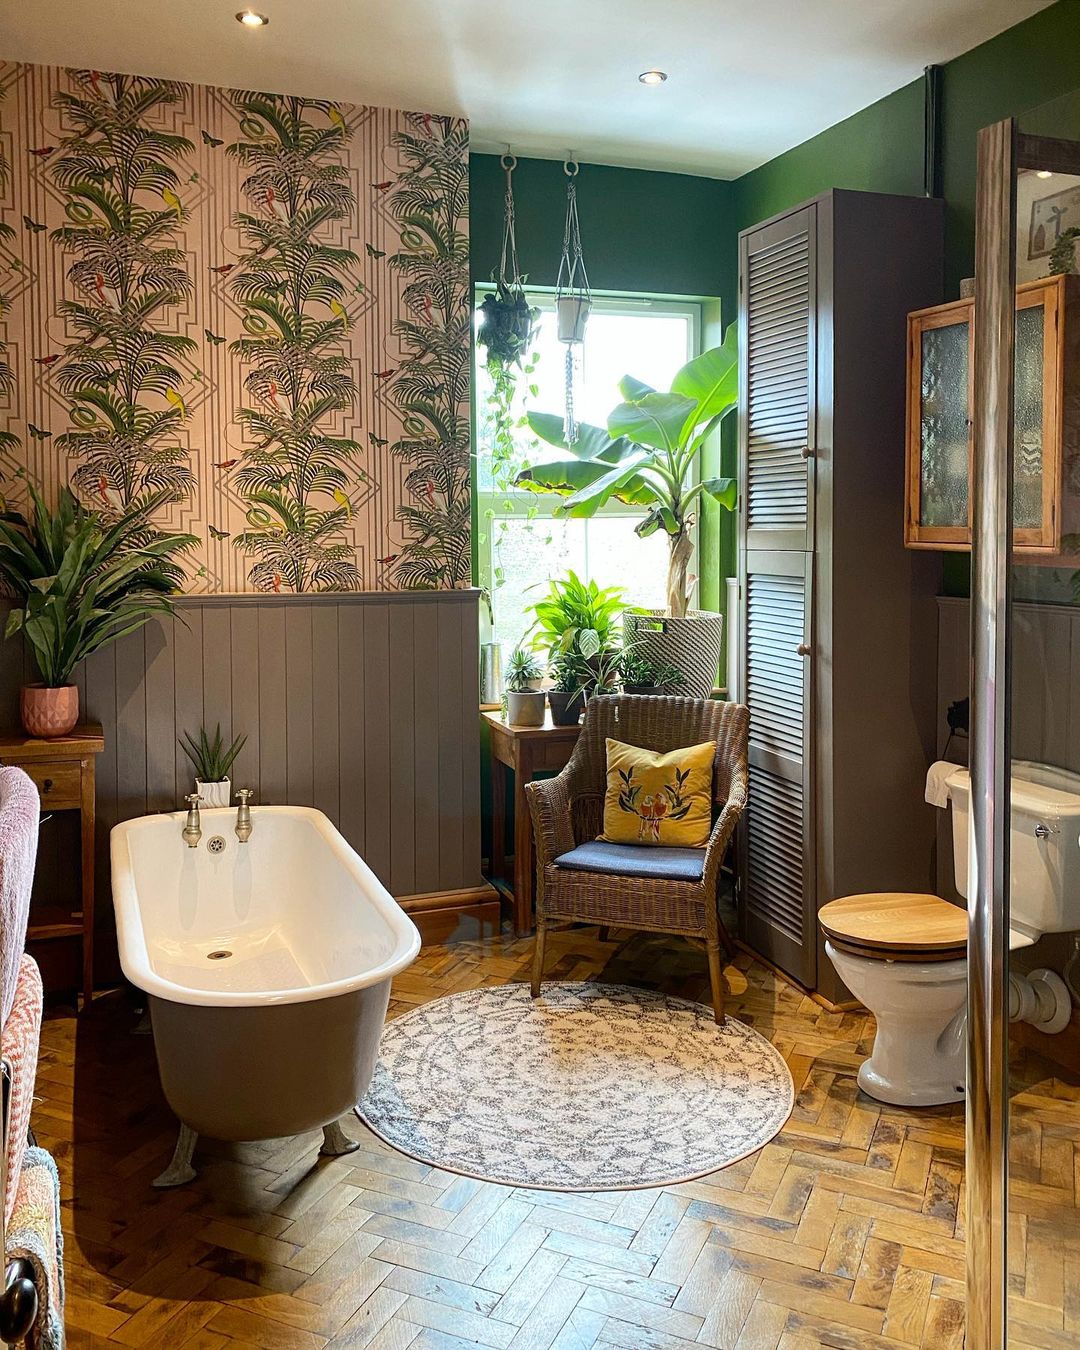 Bathroom with recycled wood flooring. Photo by Instagram user @intheloftroom